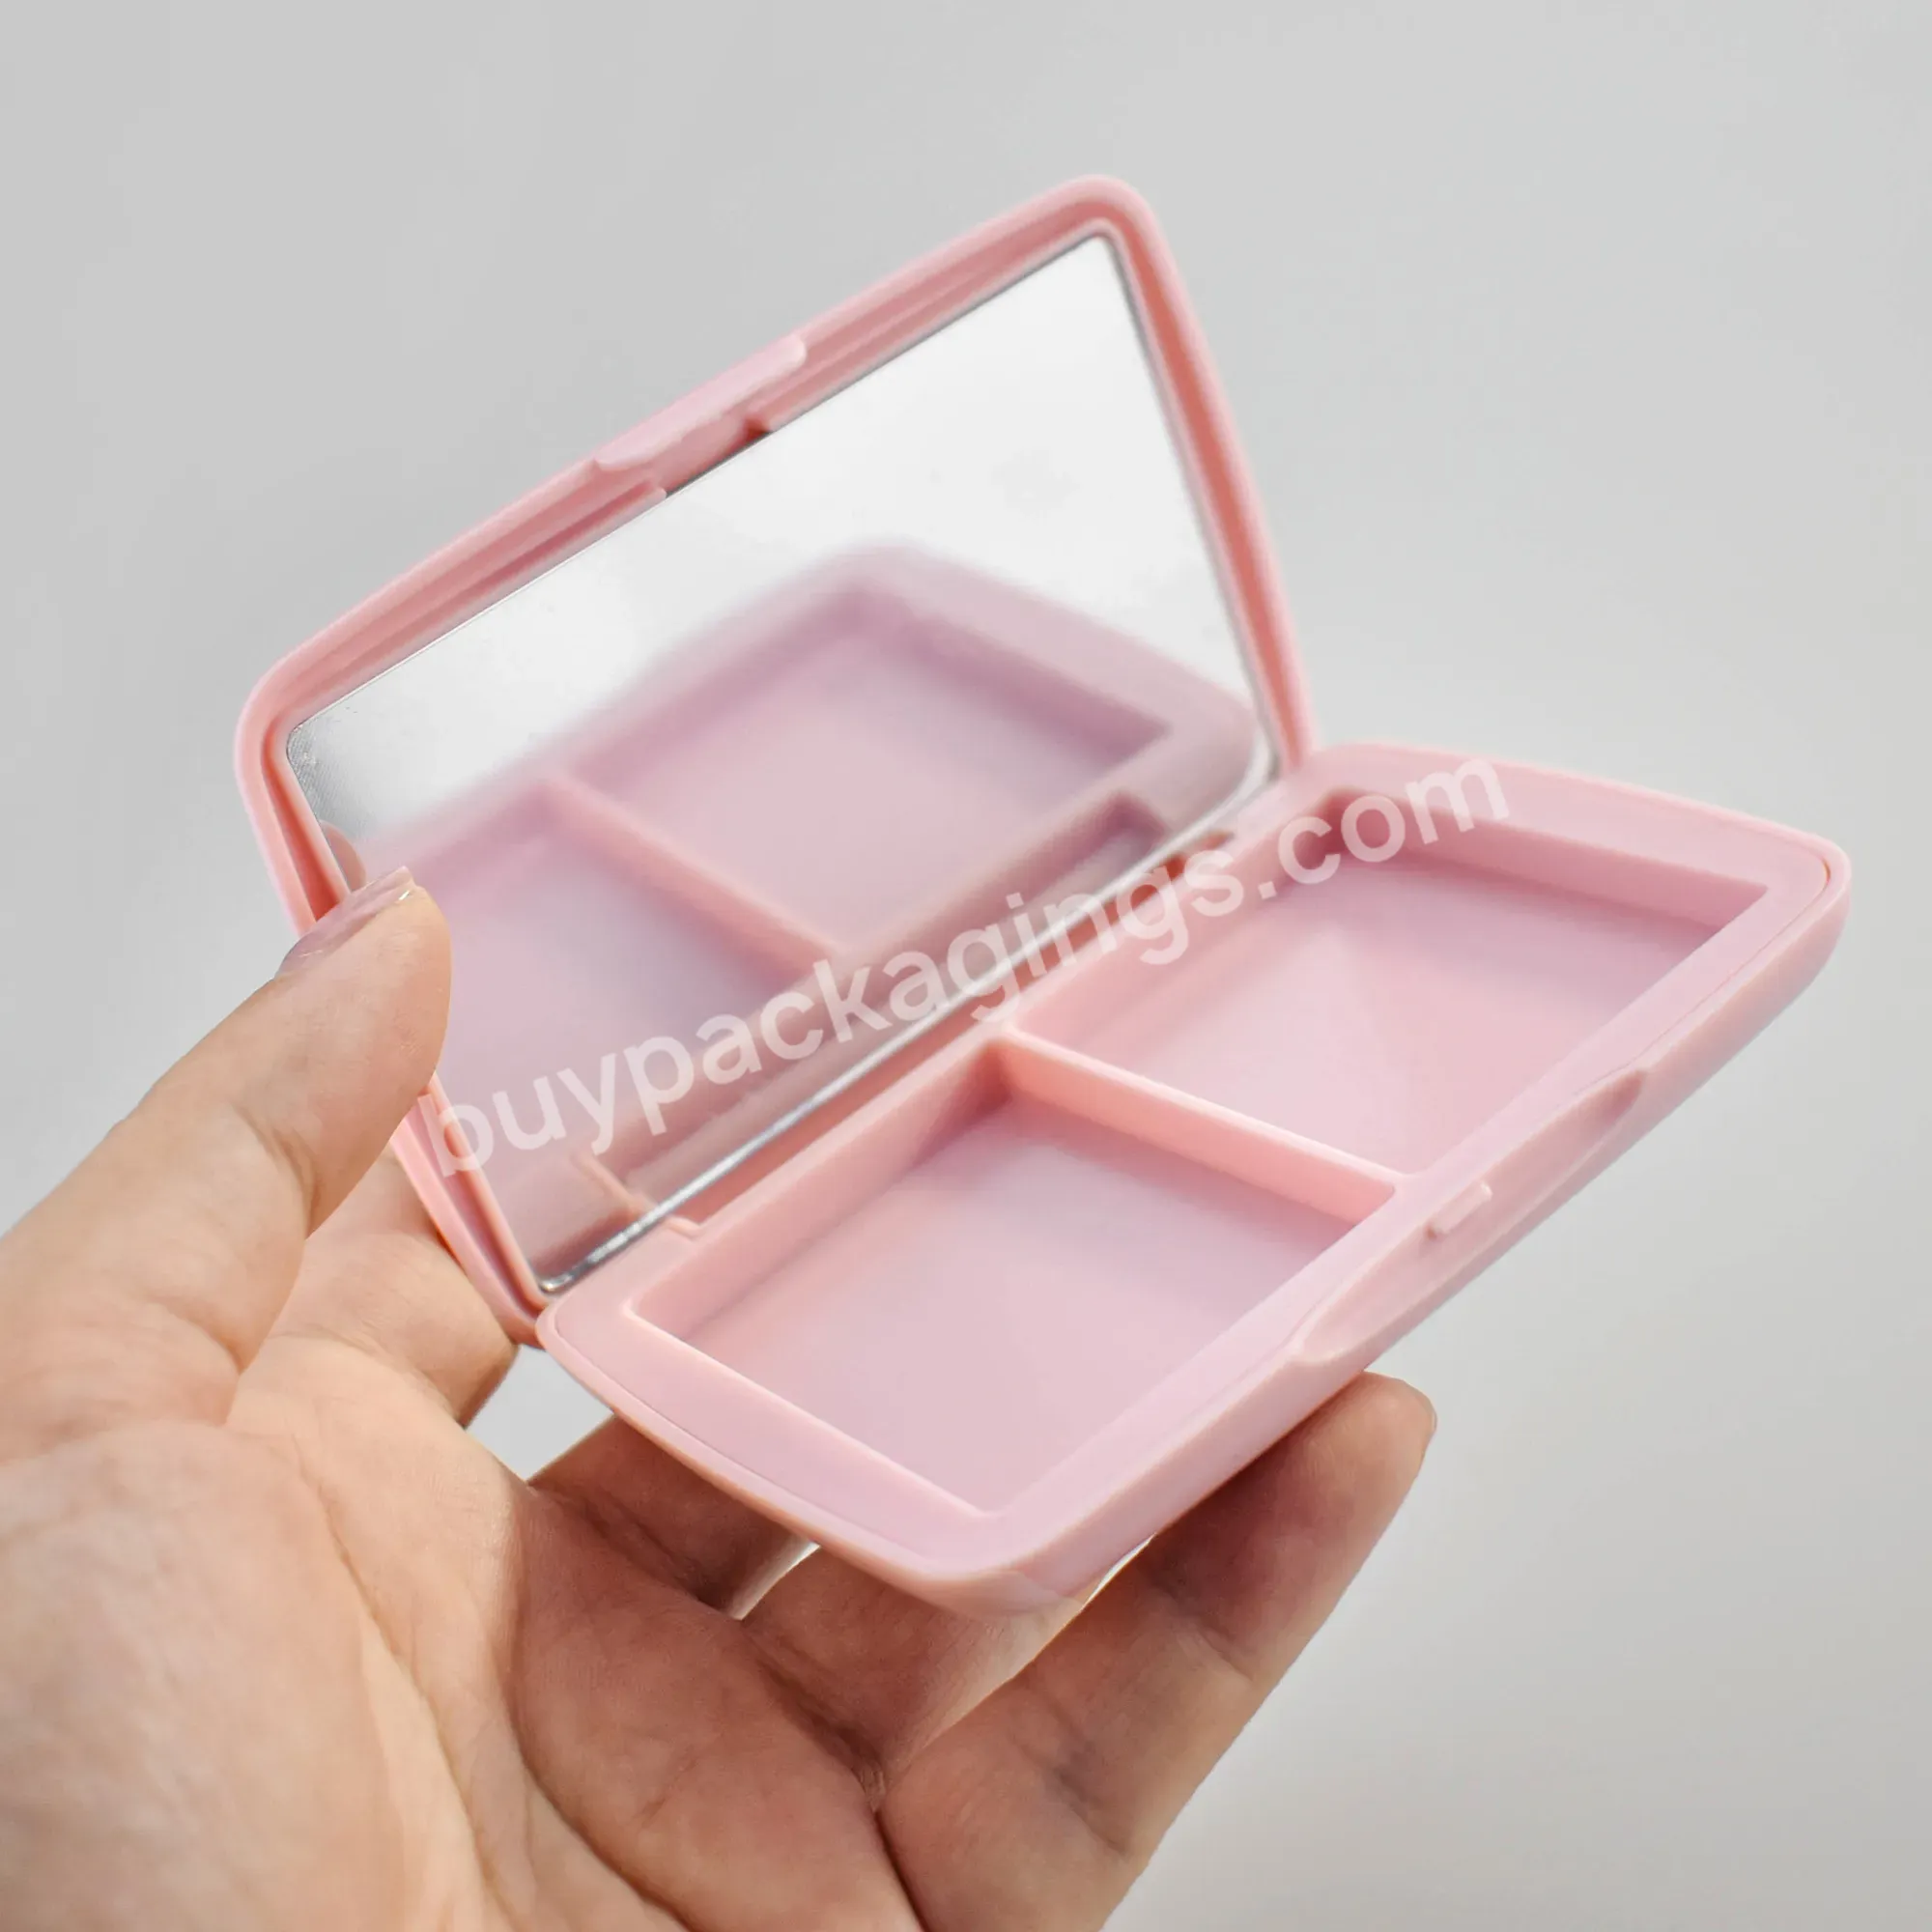 Hot Selling Empty Eyeshadow Palette Square Pressed Powder Compact Packaging Pink 2 Pans Blush Case With Mirror